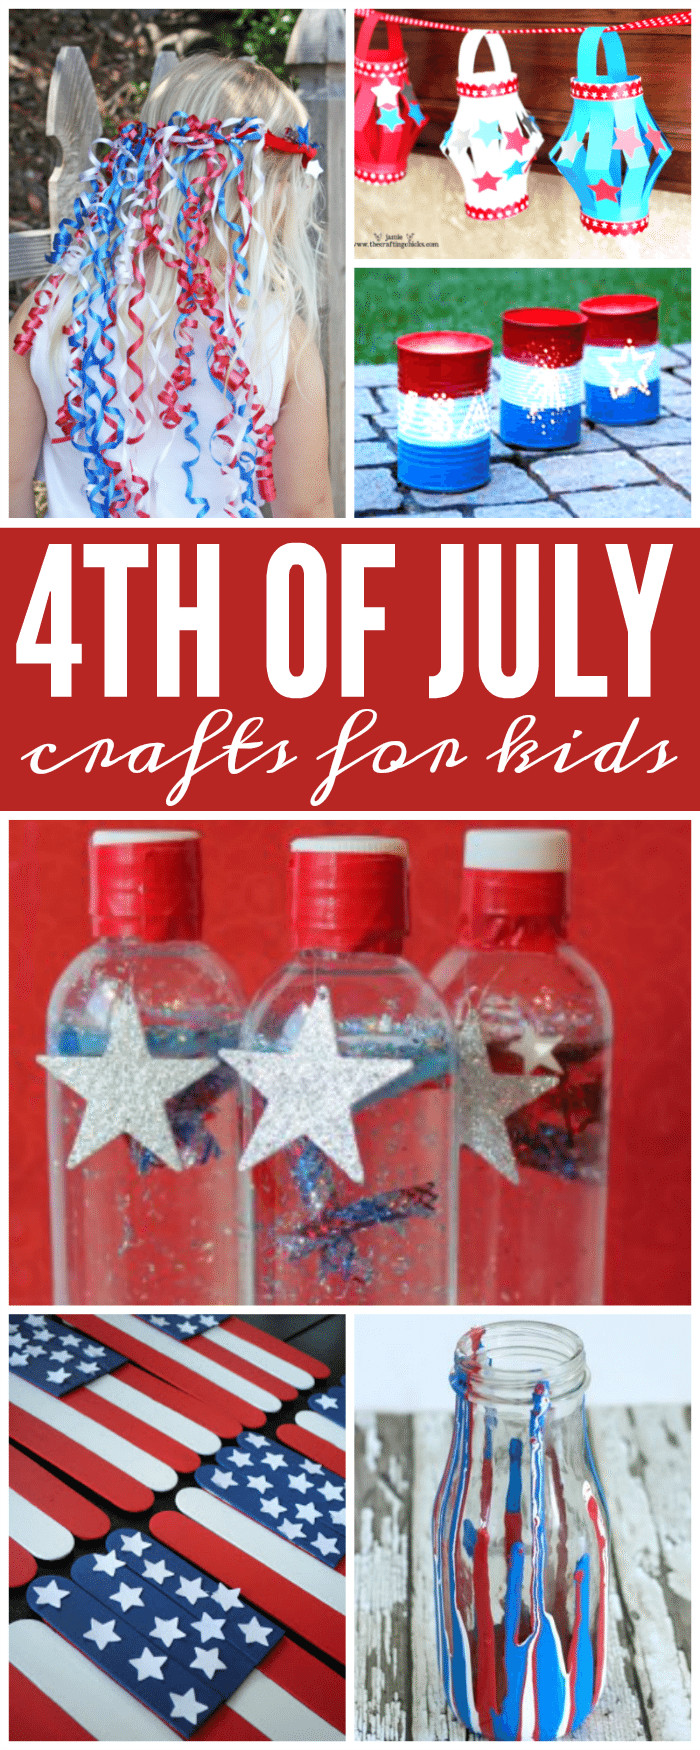 4th Of July Craft
 4th of July Crafts for Kids